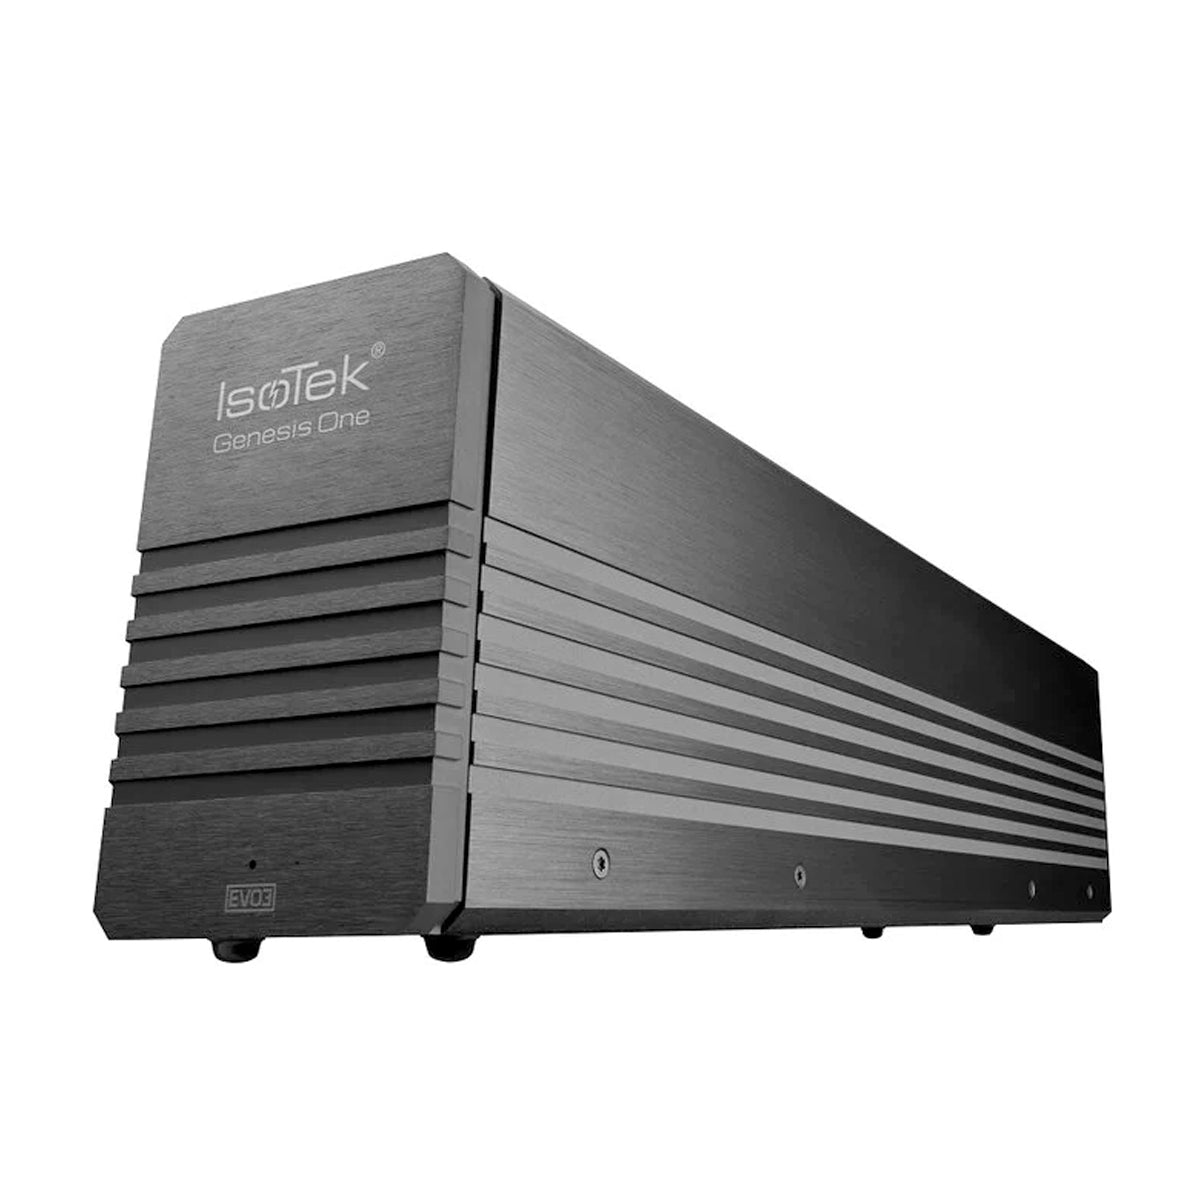 ISOTEK EVO3 Genesis One Power Conditioner without LED Display - Black